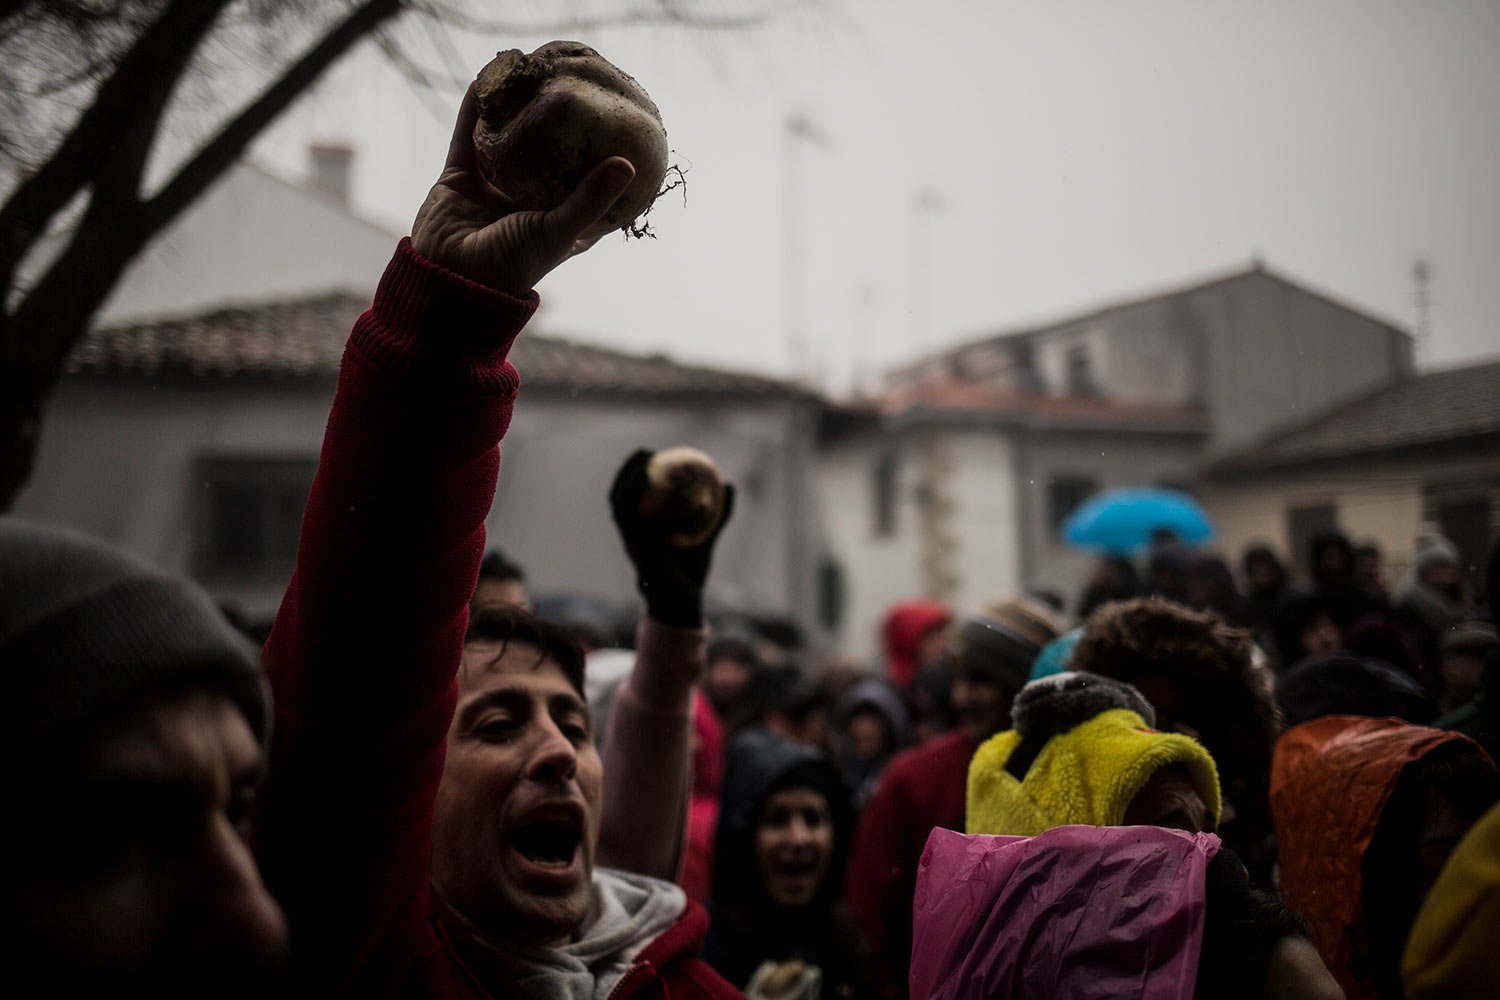  In this Jan. 19, 2019 photo, people hold up turnips before throwing them at the Jarramplas as he makes his way through the streets beating his drum during the Jarramplas festival in the tiny southwestern Spanish town of Piornal, Spain. (AP Photo/Jav